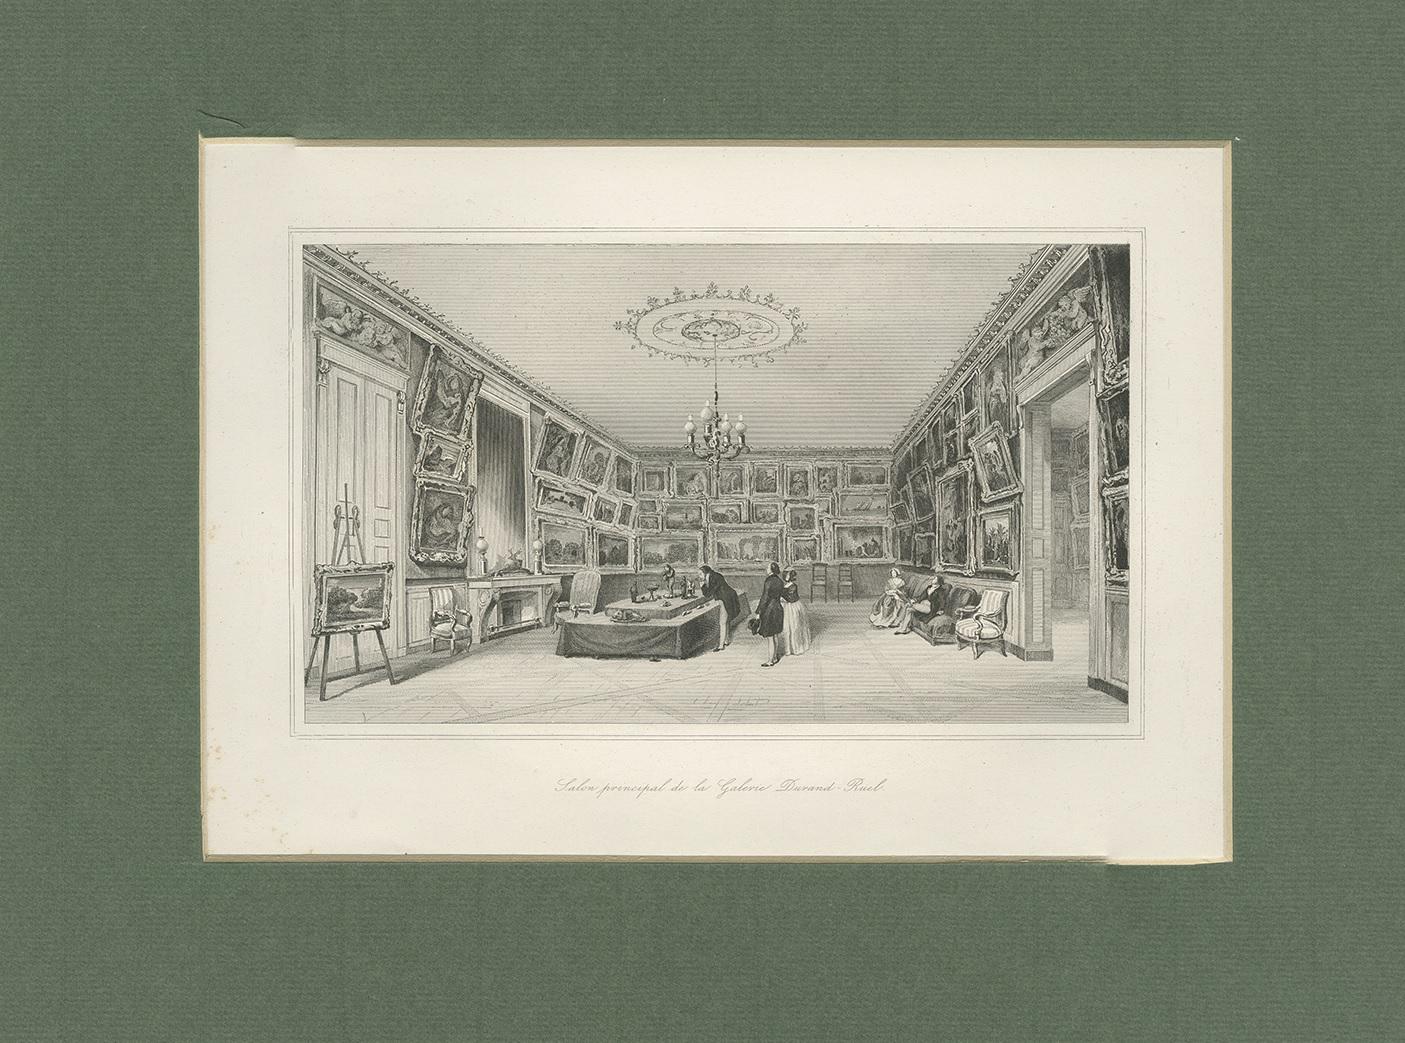 Antique print titled 'Salon principal de la Galerie Durand-Ruel'. This print shows the interior of the gallery of Paul Durand-Ruel. Paul Durand-Ruel (31 October 1831, Paris – 5 February 1922, Paris) was a French art dealer who is associated with the